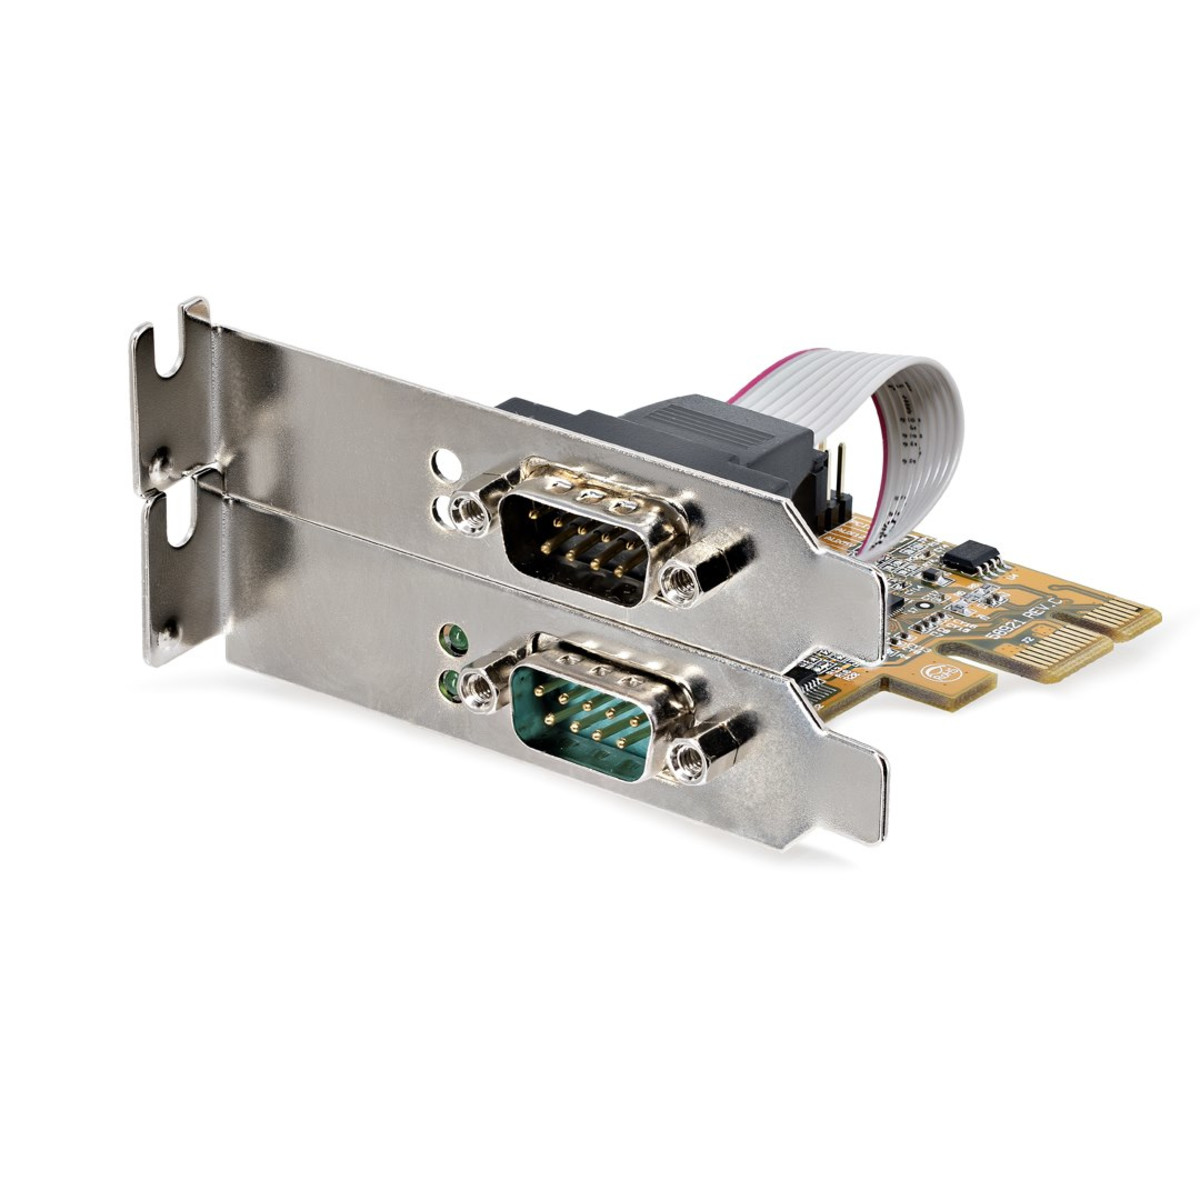 2-Port PCI Express RS232 Serial Card